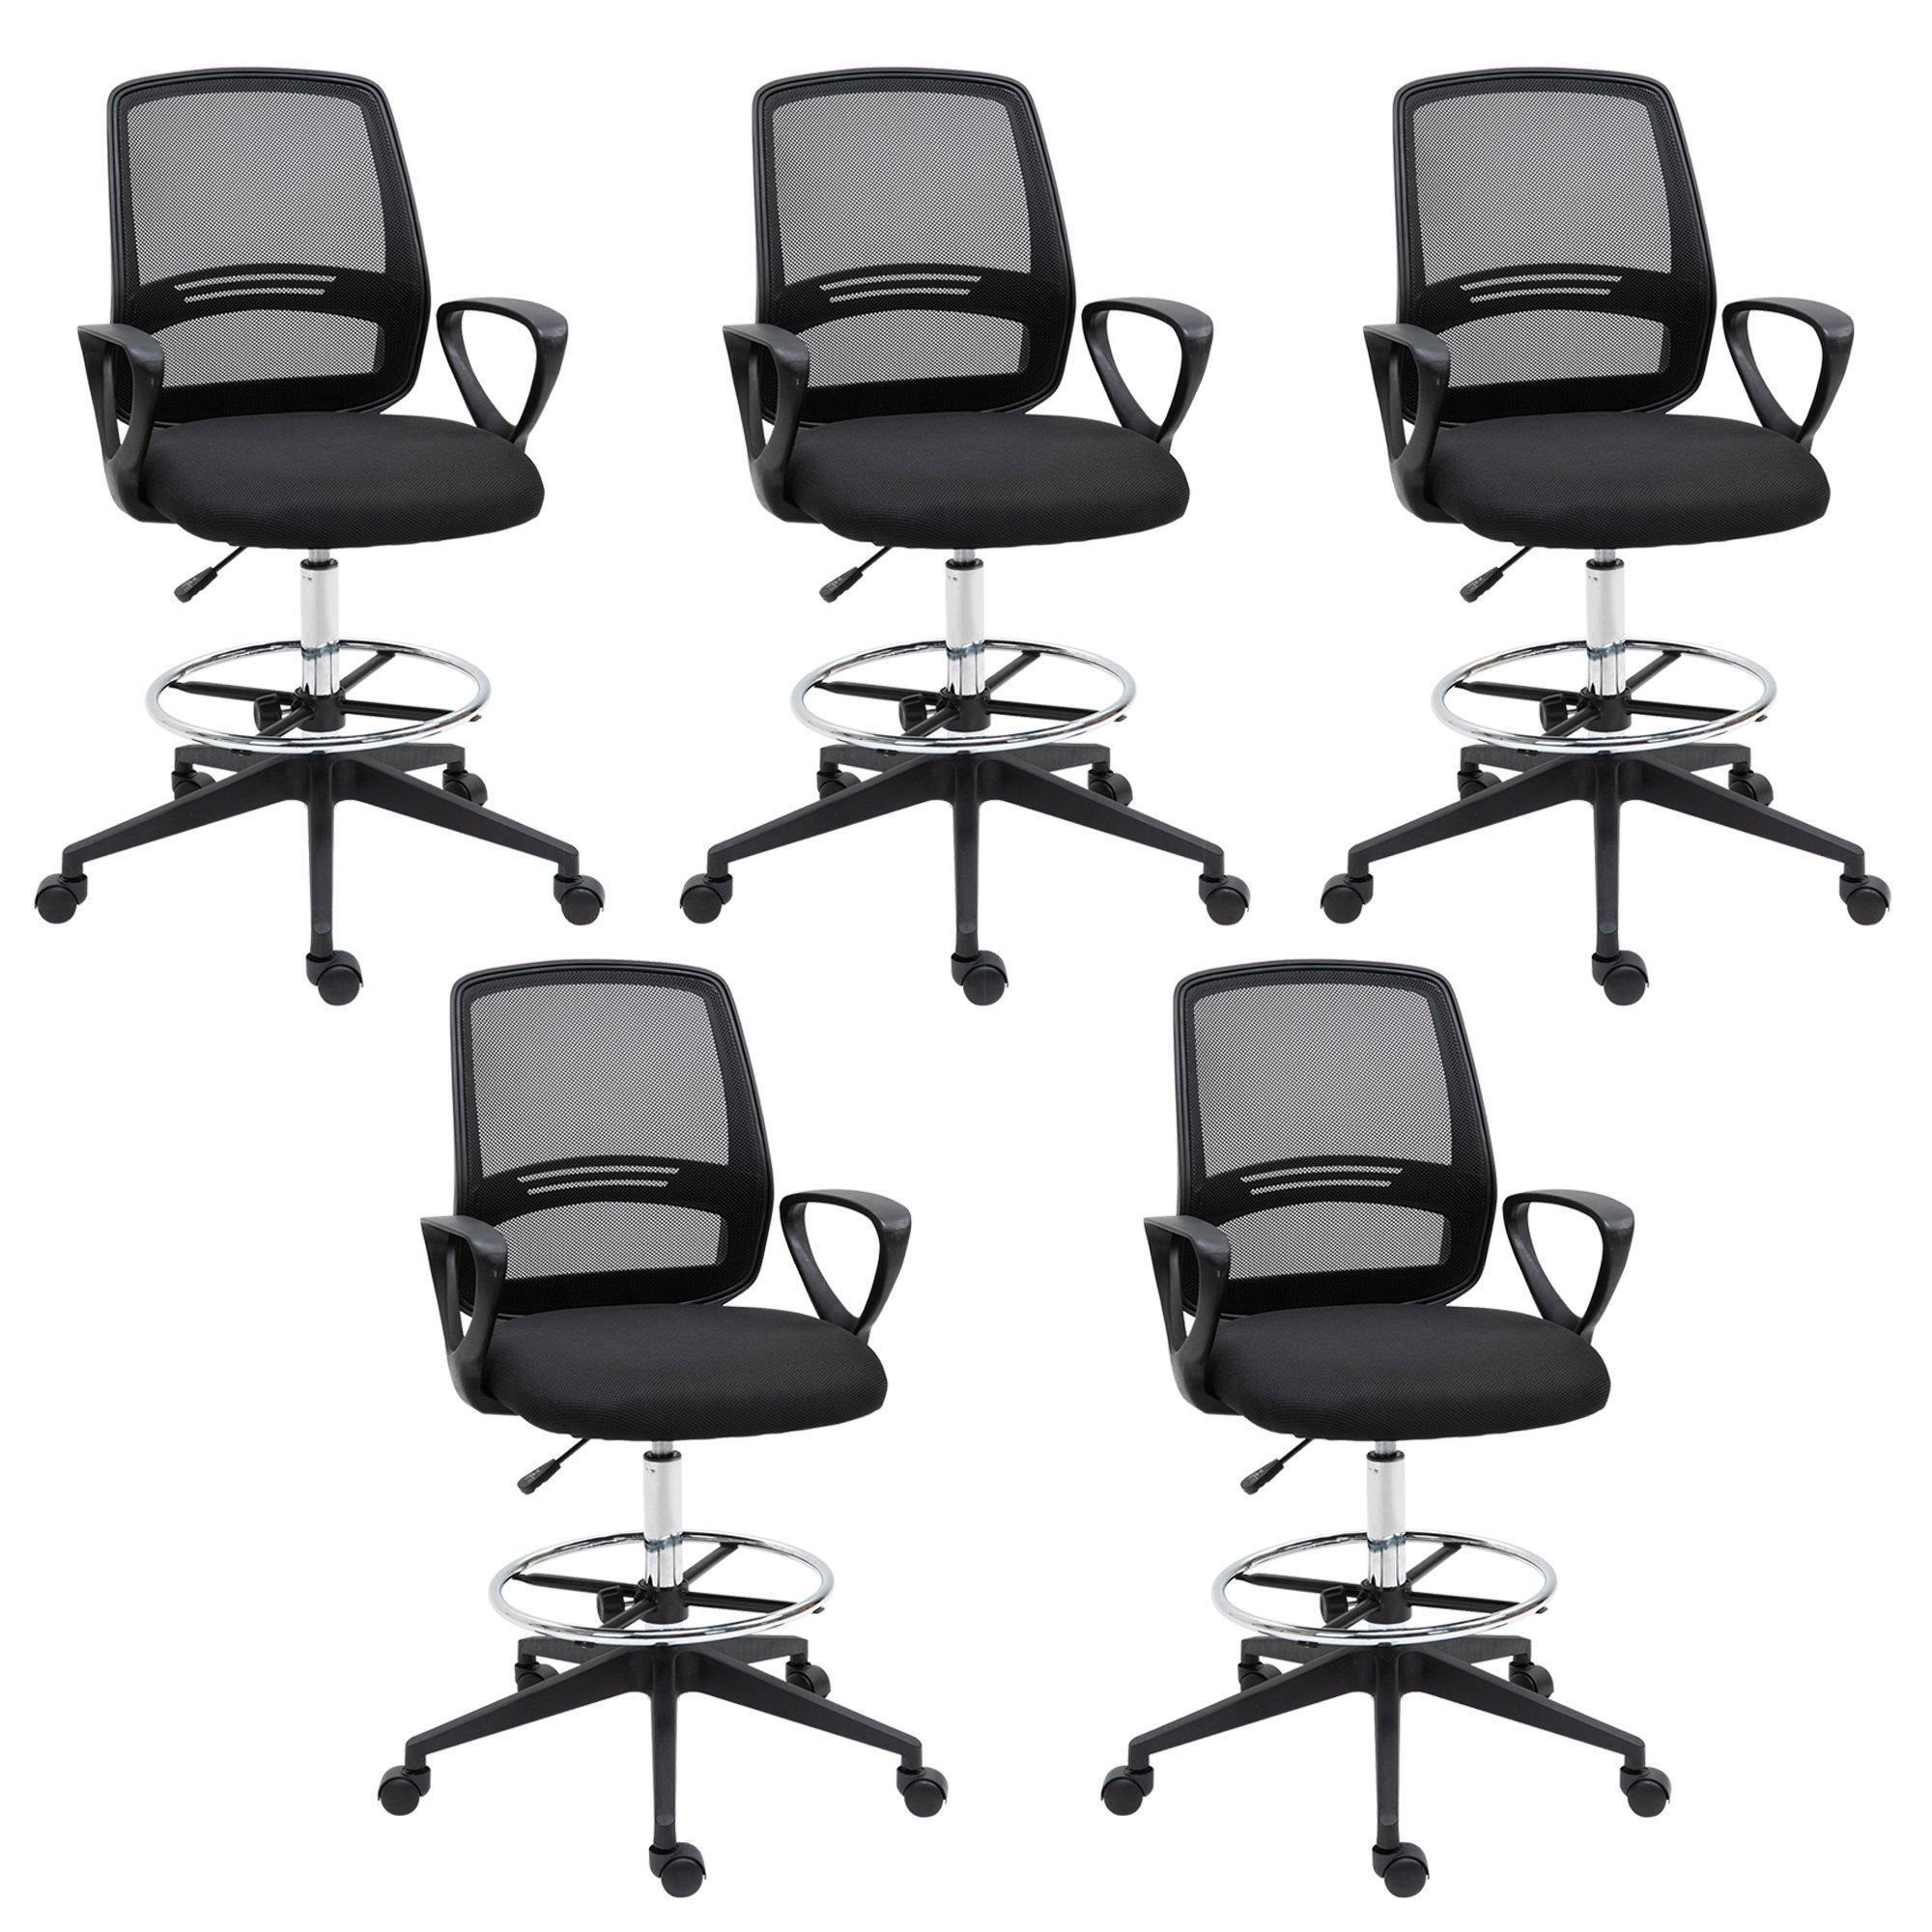 Draughtsman Chair Tall Office Chair with Adjustable Height - image 1